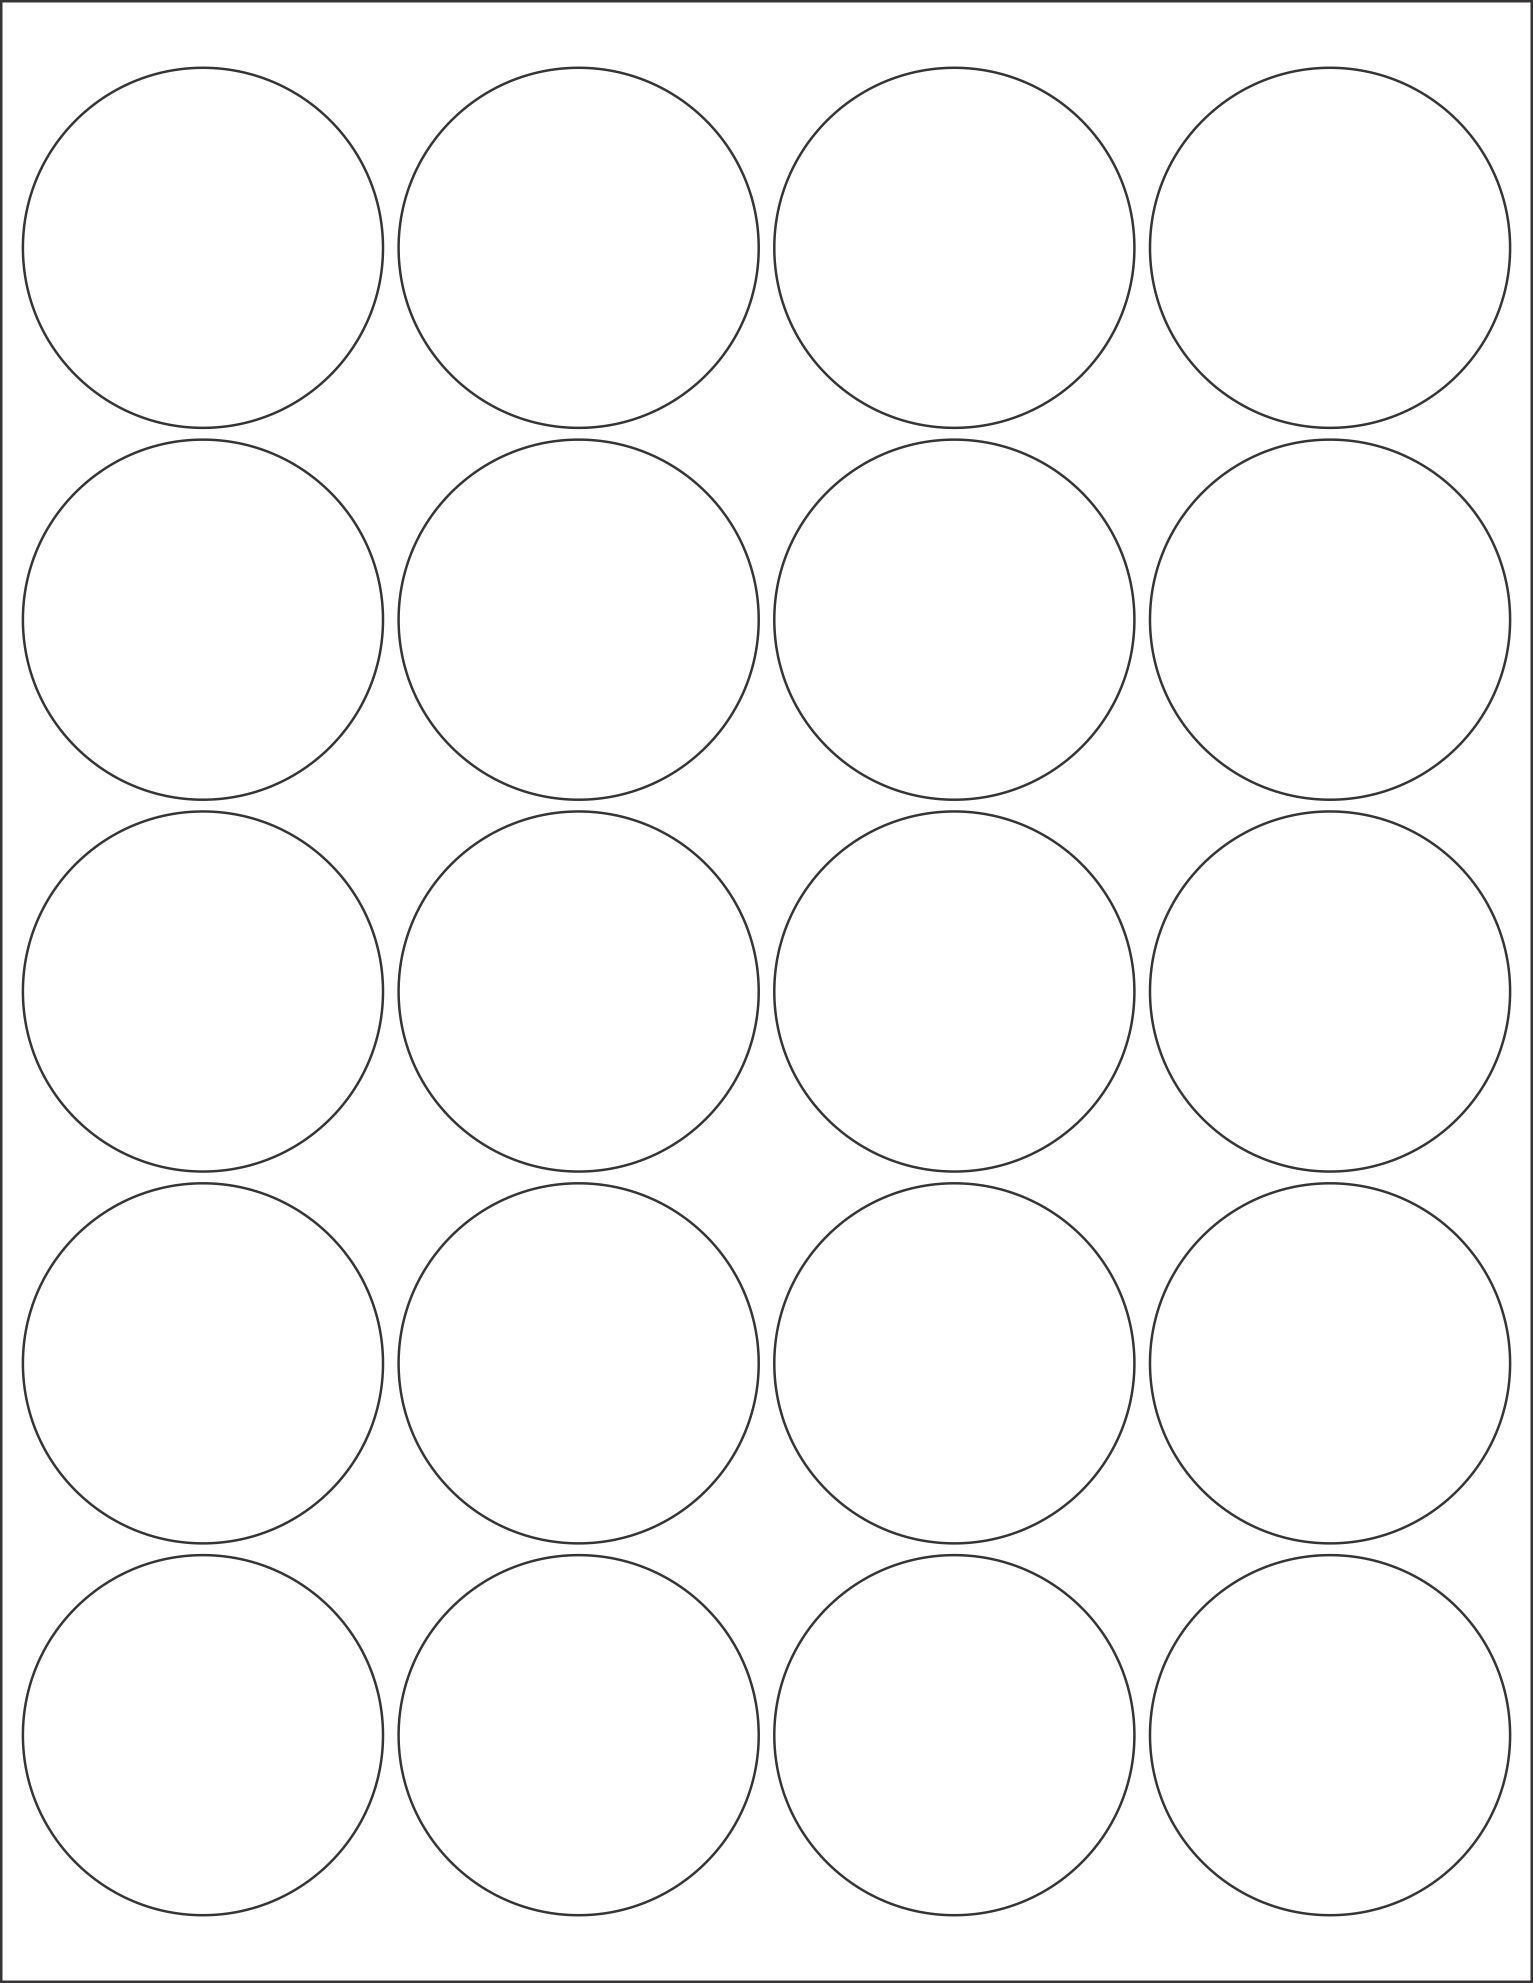 1.5 inch circle template